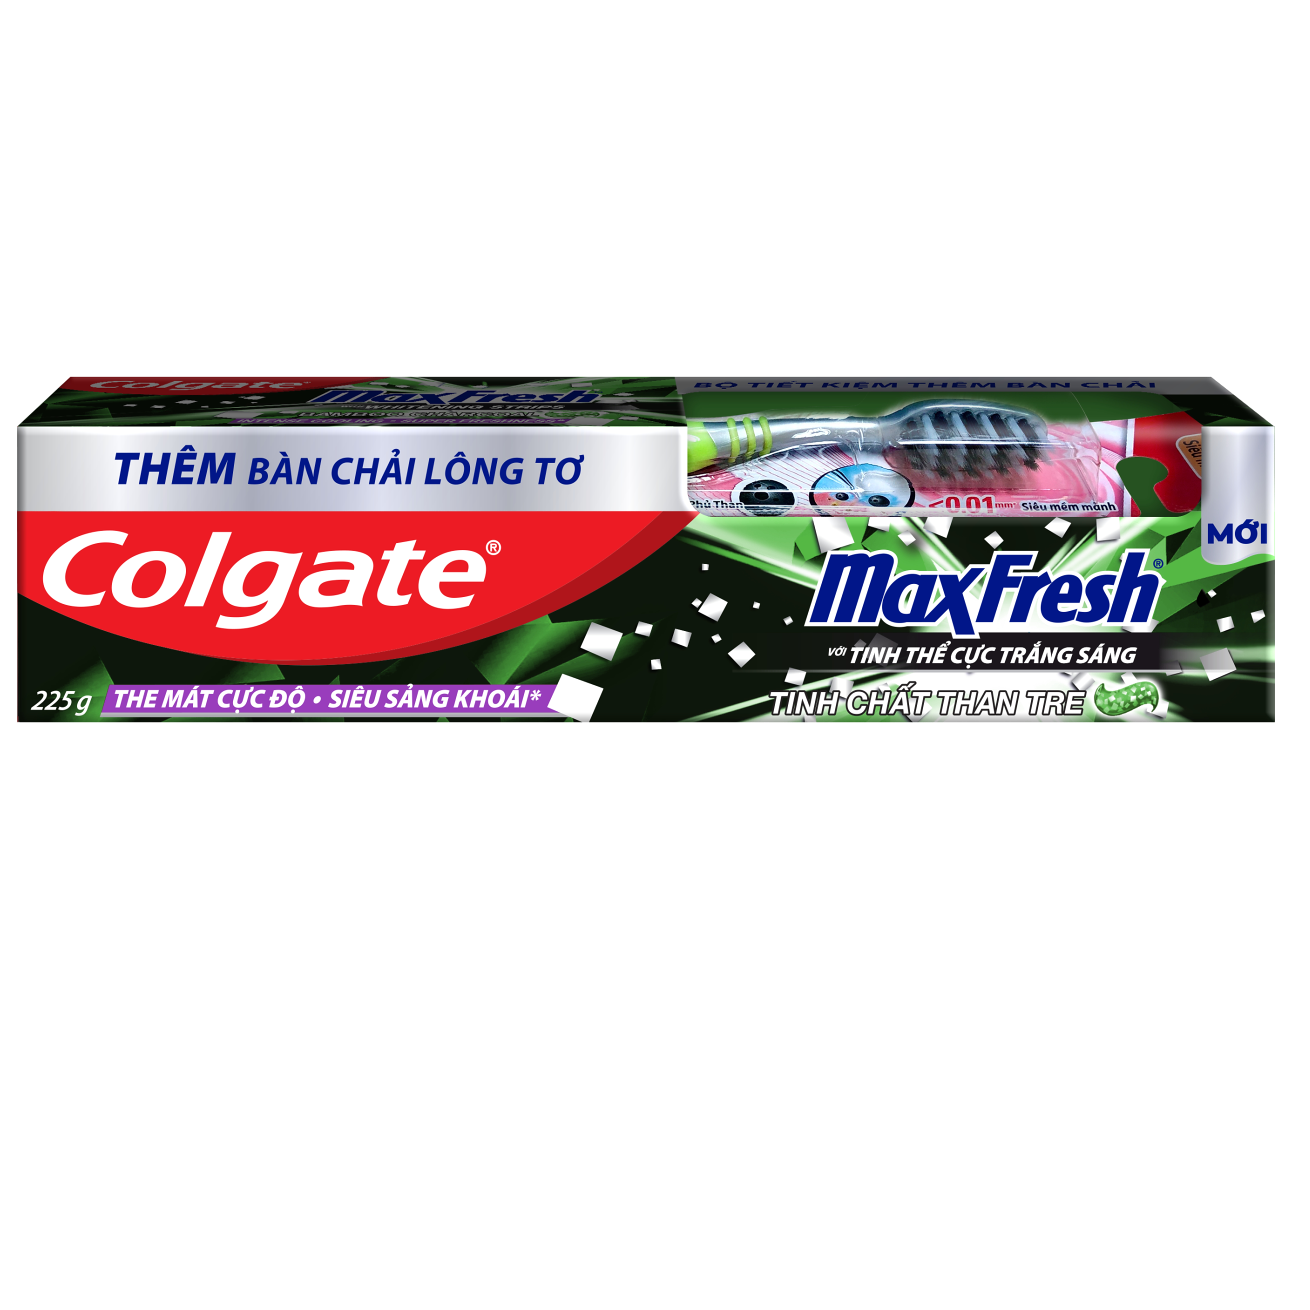 Colgate Toothpaste Maxfresh  Bamboo 225g  ( 6 Unit/pack, 6 pack/case)